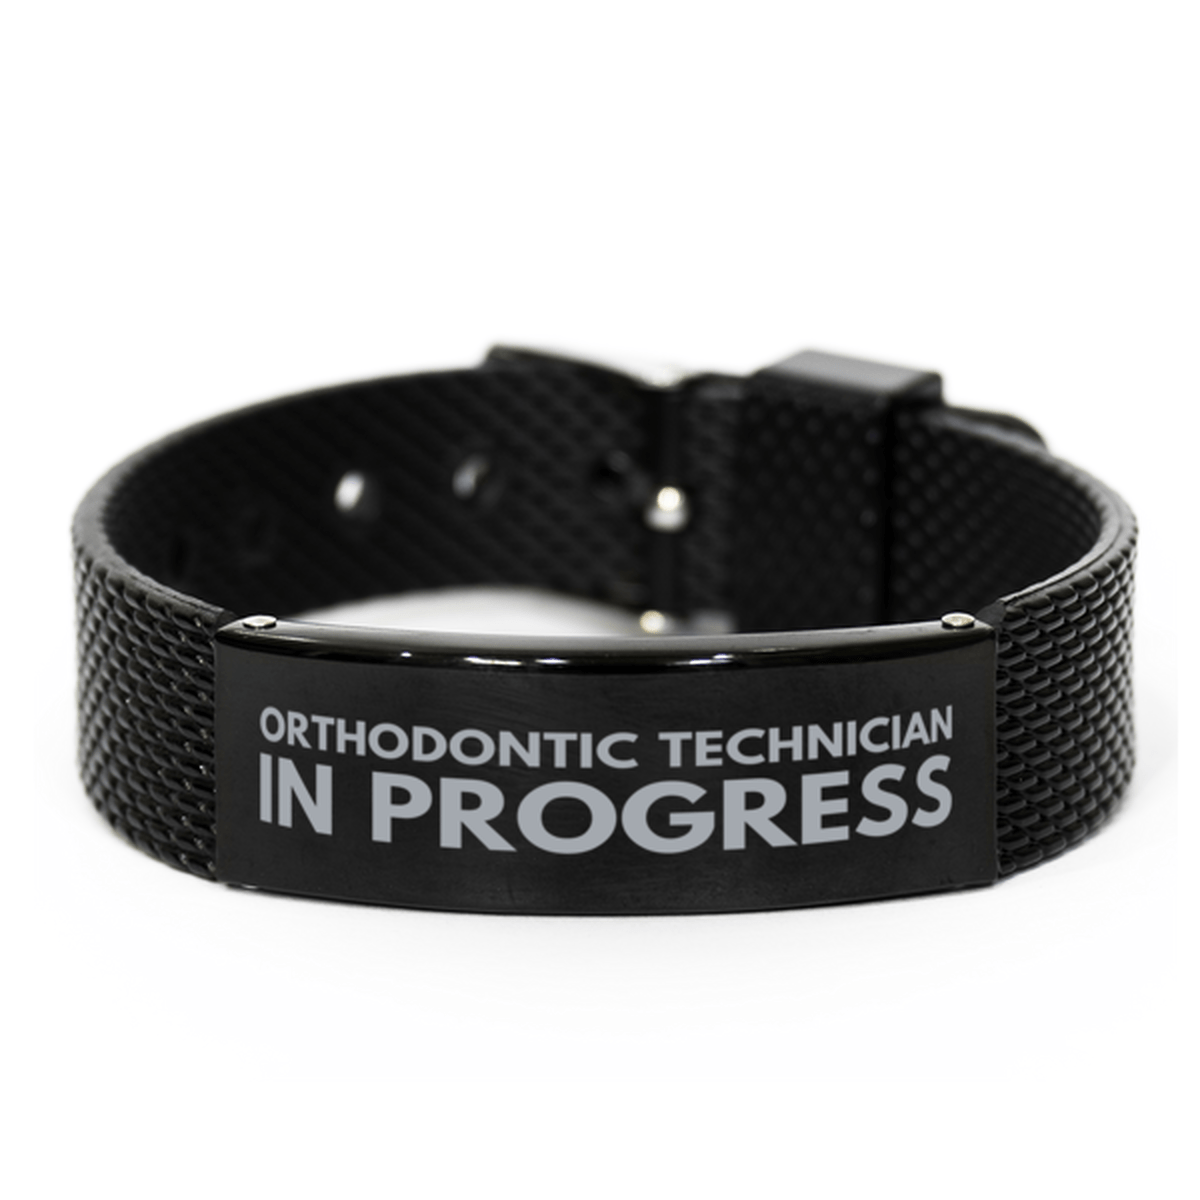 Inspirational Orthodontic Technician Black Shark Mesh Bracelet, Orthodontic Technician In Progress, Best Graduation Gifts for Students